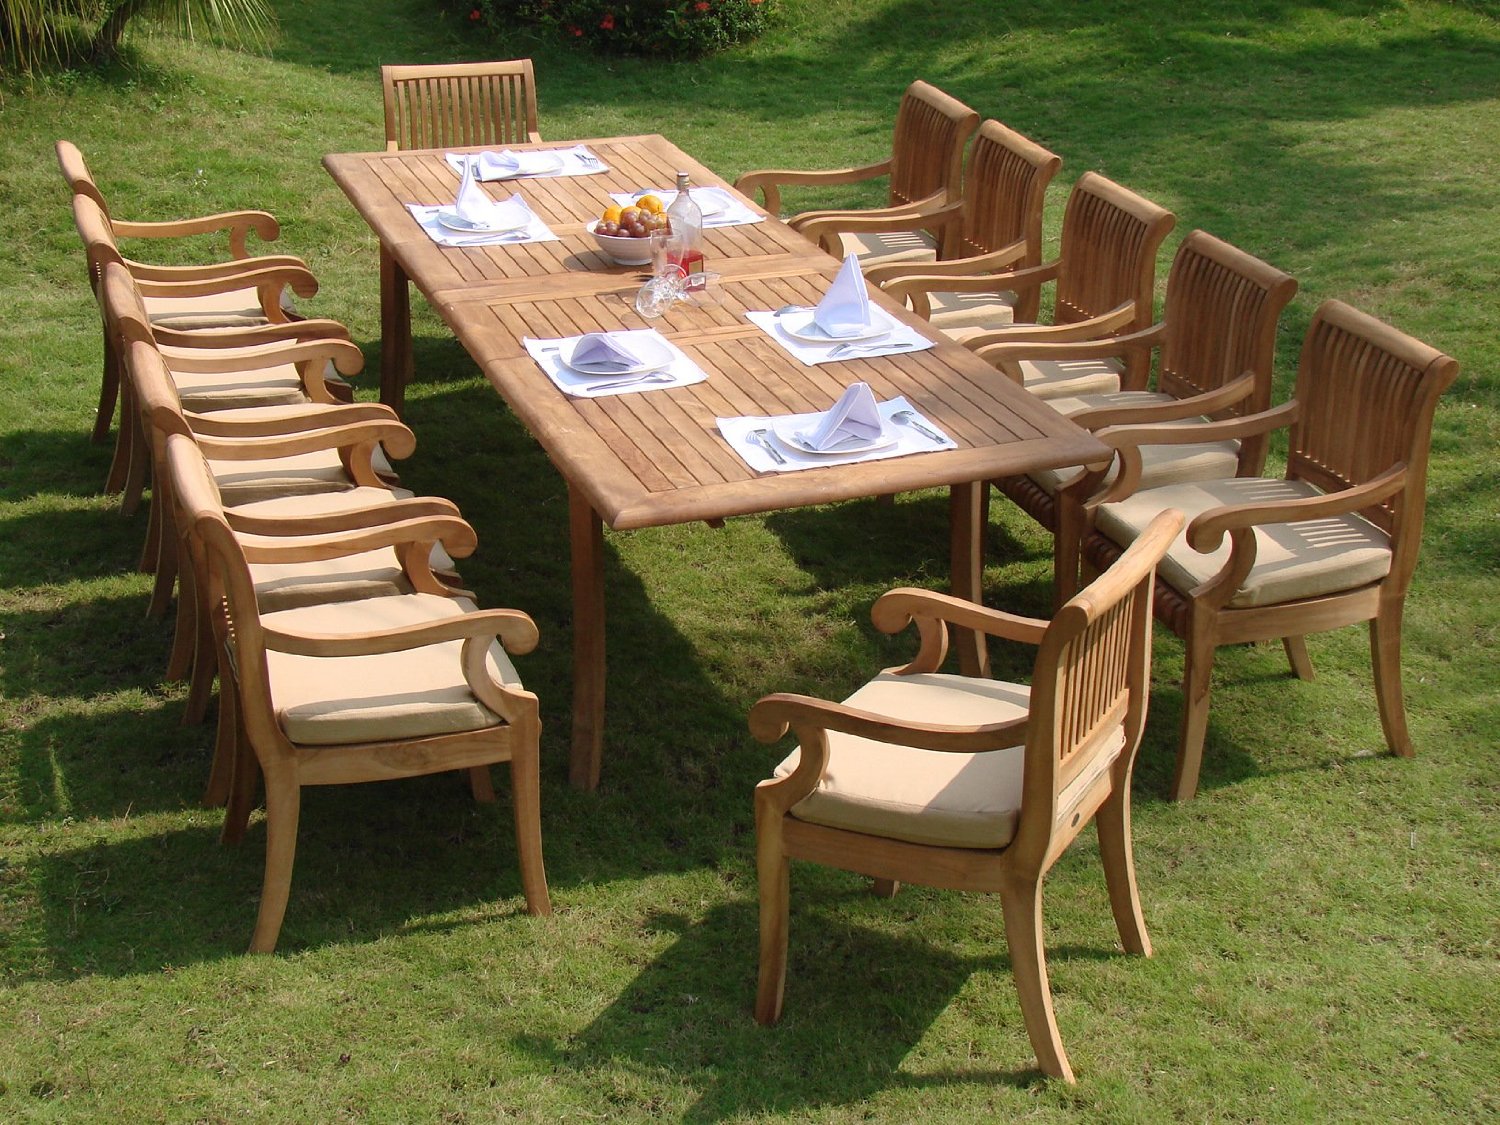 Creating A Luxurious Outdoor Oasis With A Teak Furniture Set